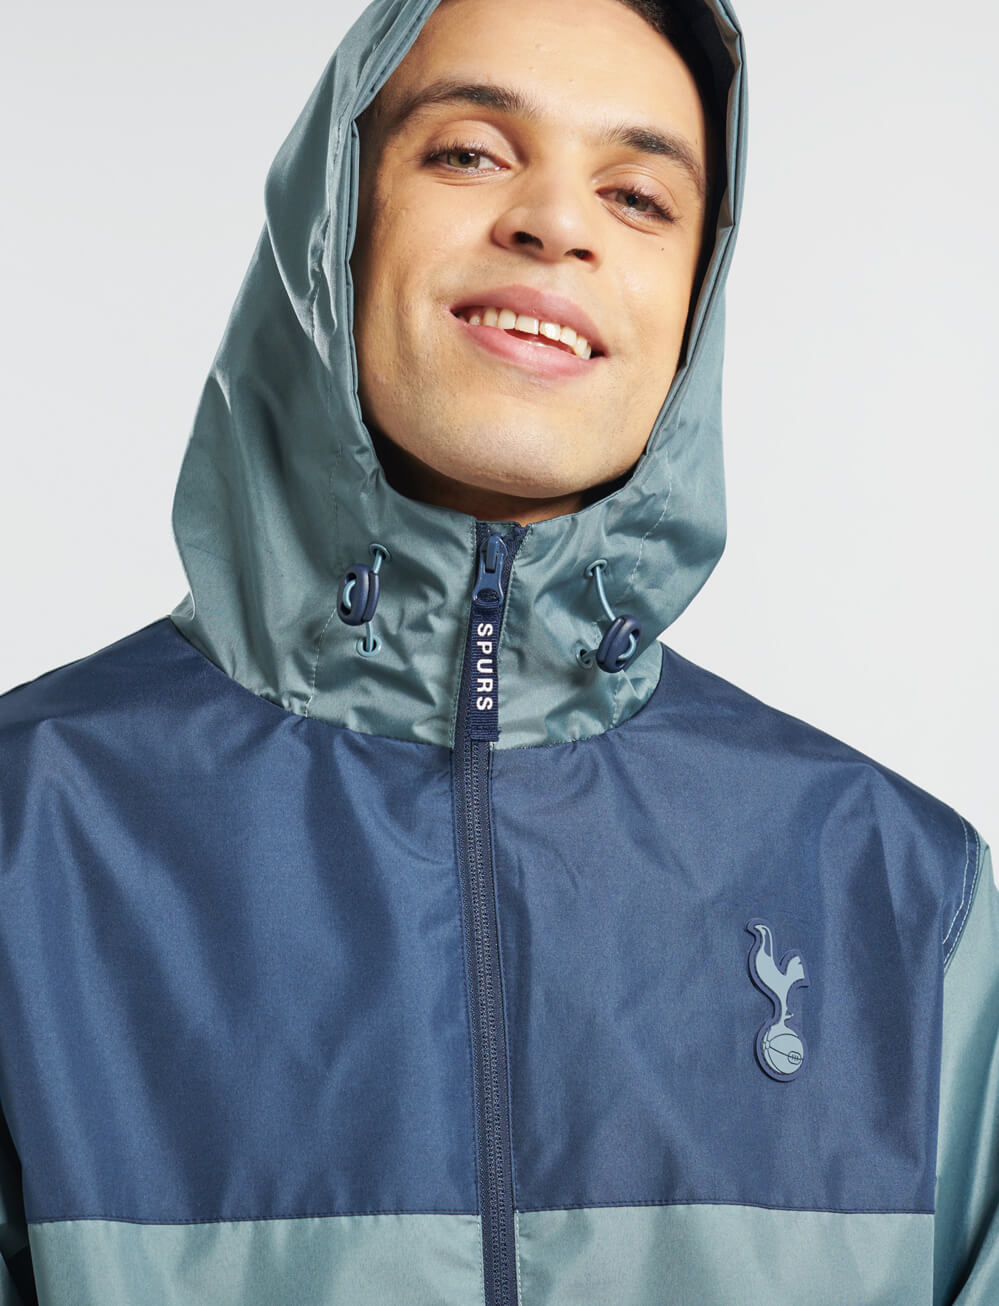 Official Tottenham Shower Jacket - Stormy Weather - The World Football Store